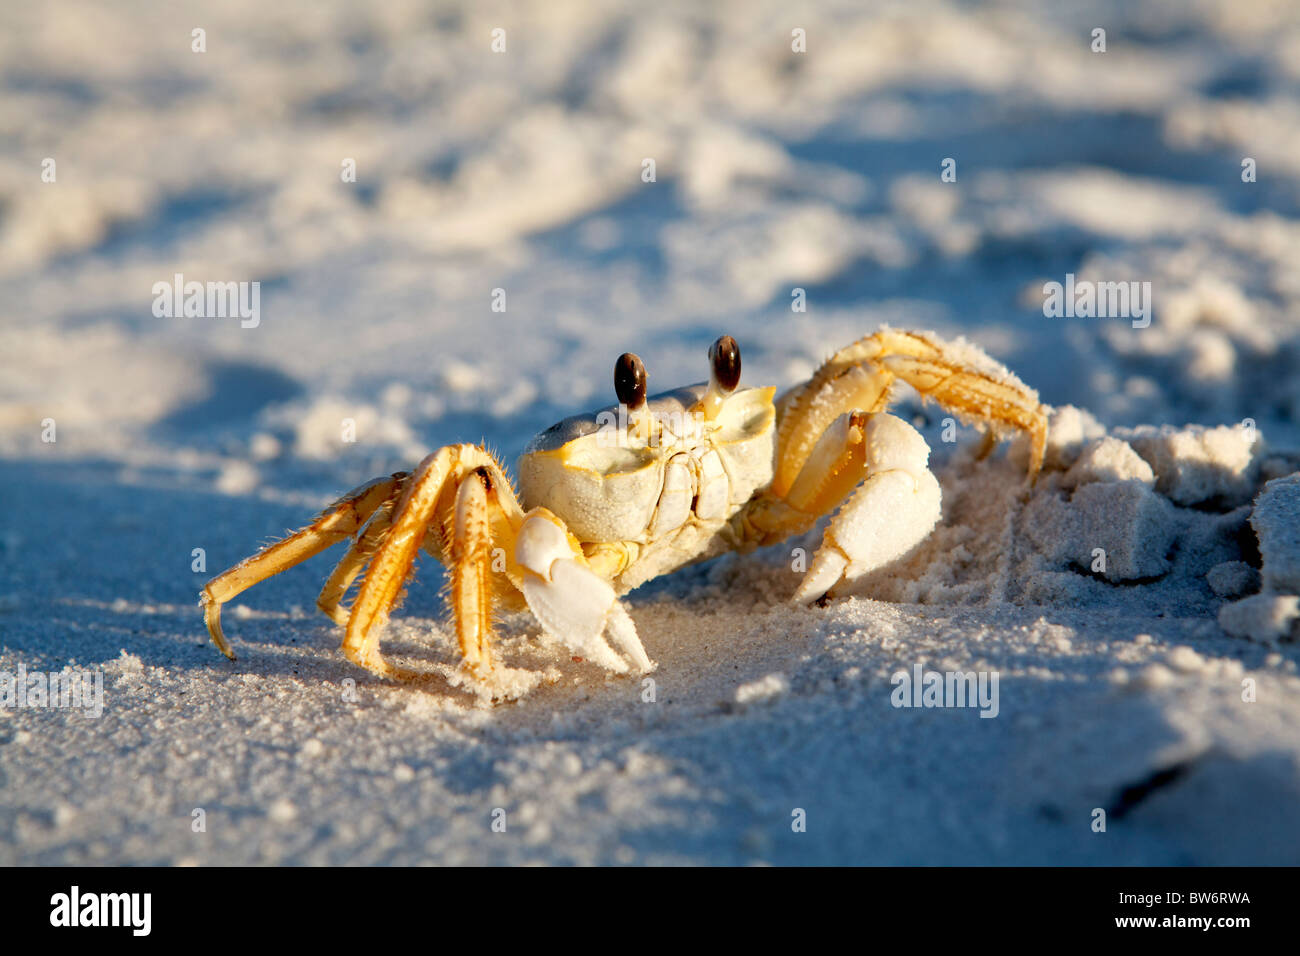 Close up of a ghost crab walking on a beach. Gulf Coast, Florida. Stock Photo